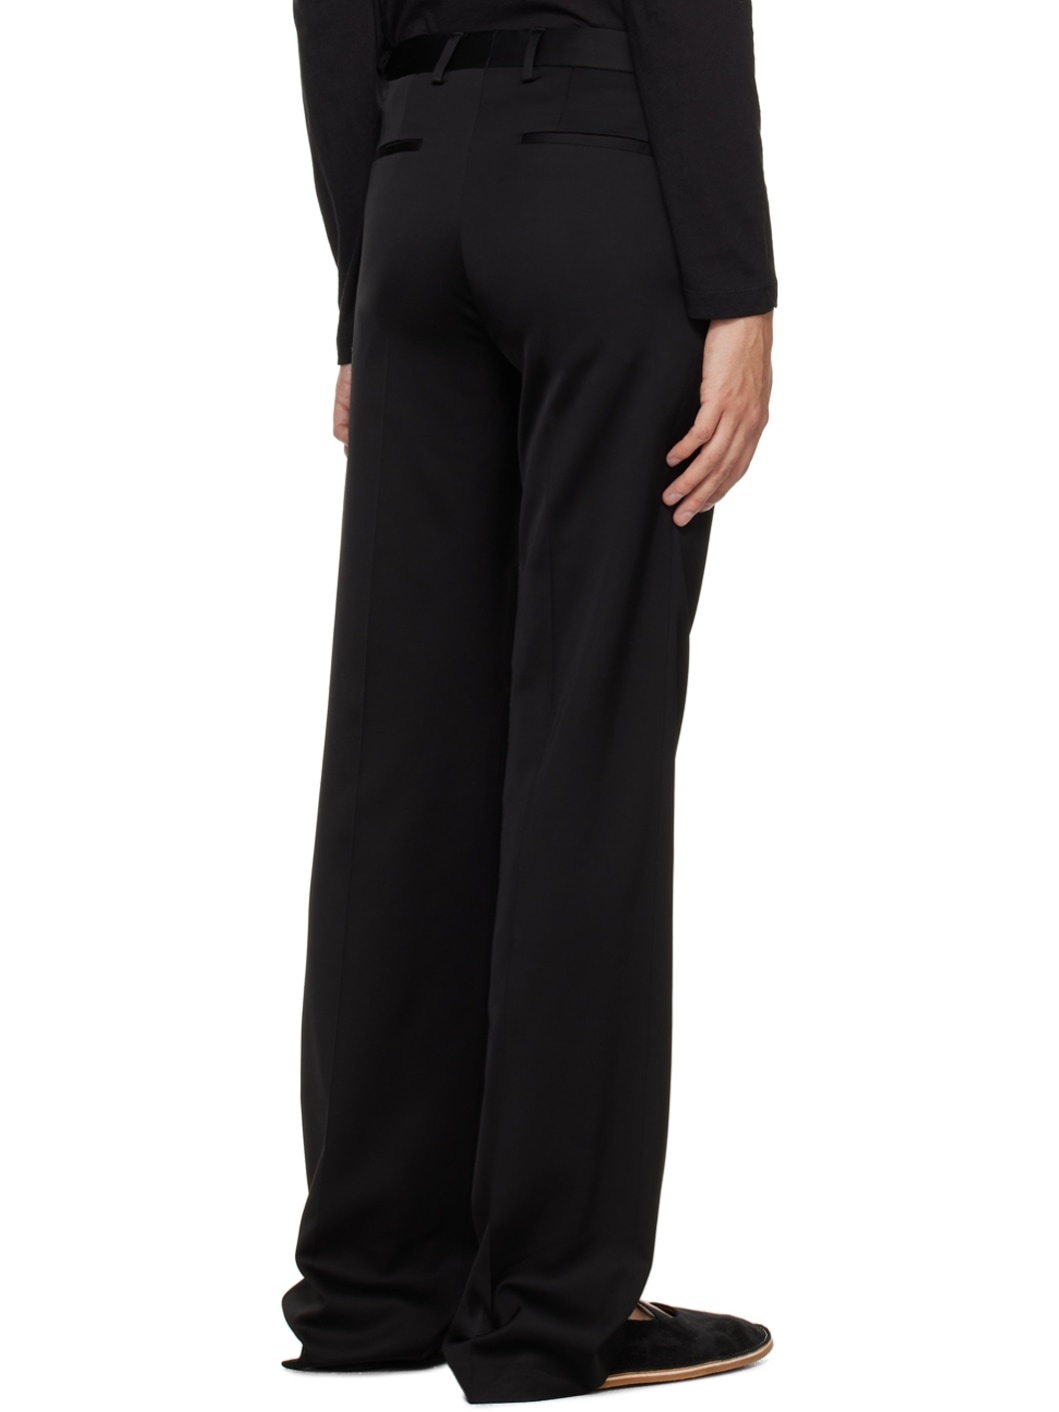 Black Creased Trousers - 3